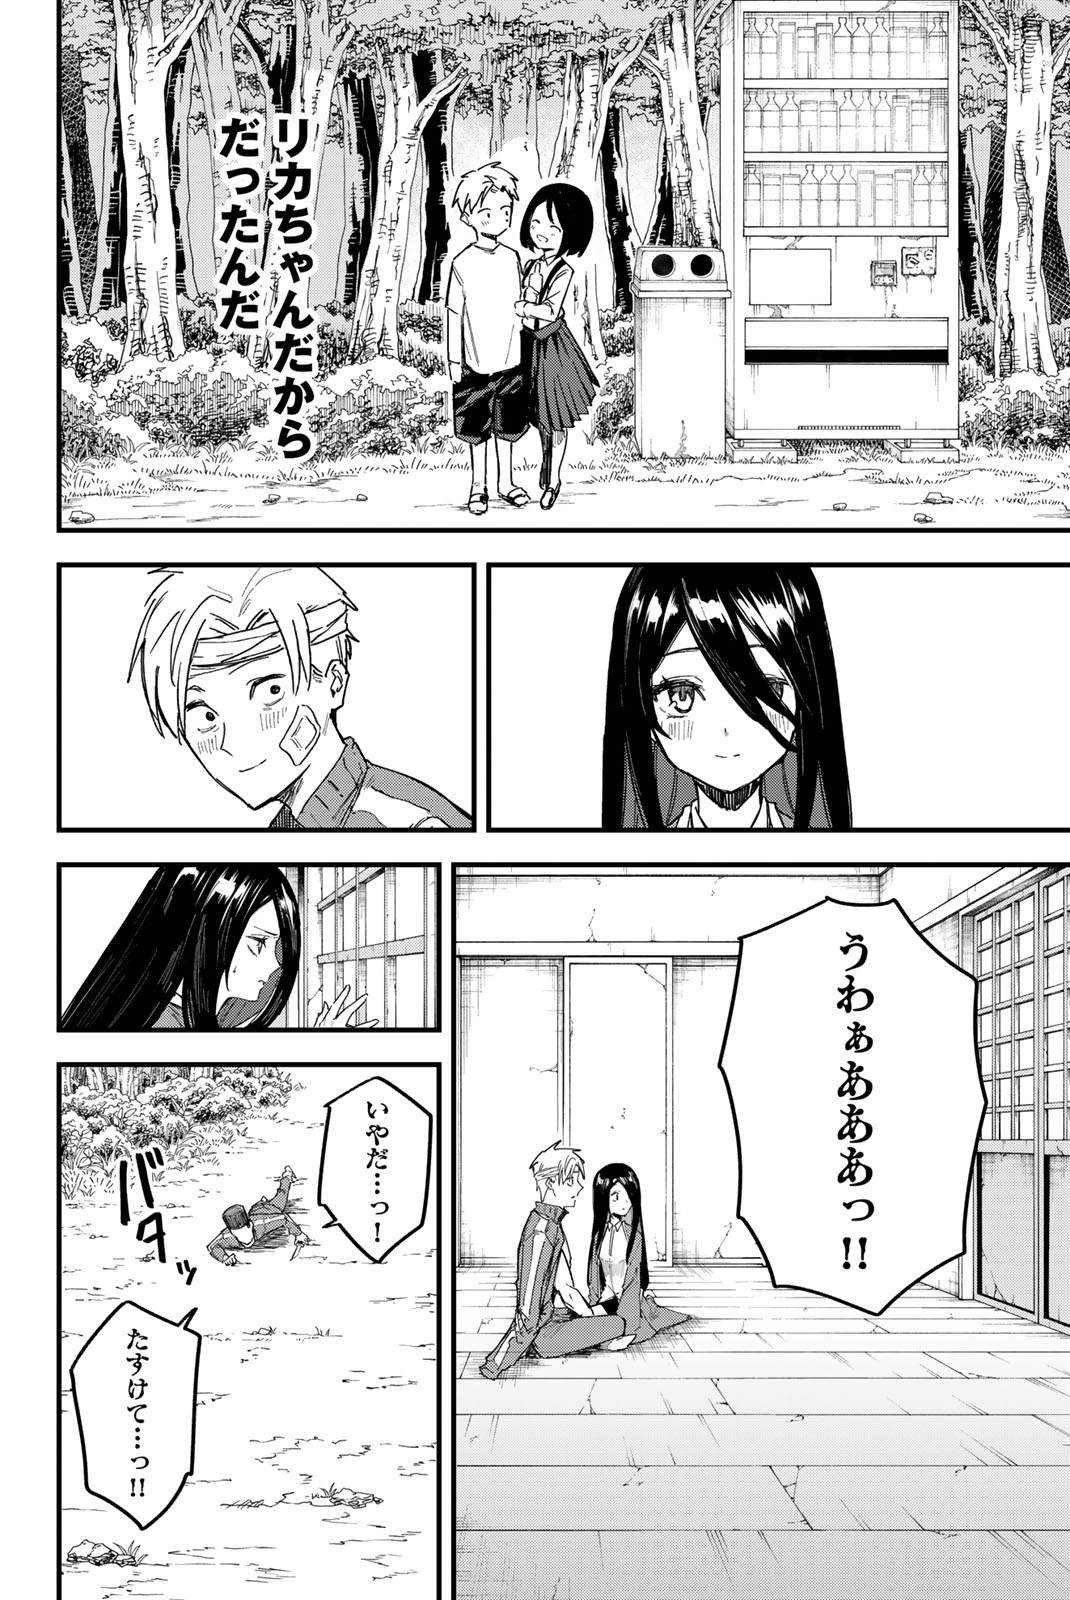 REDRUM 第1.2話 - Page 14